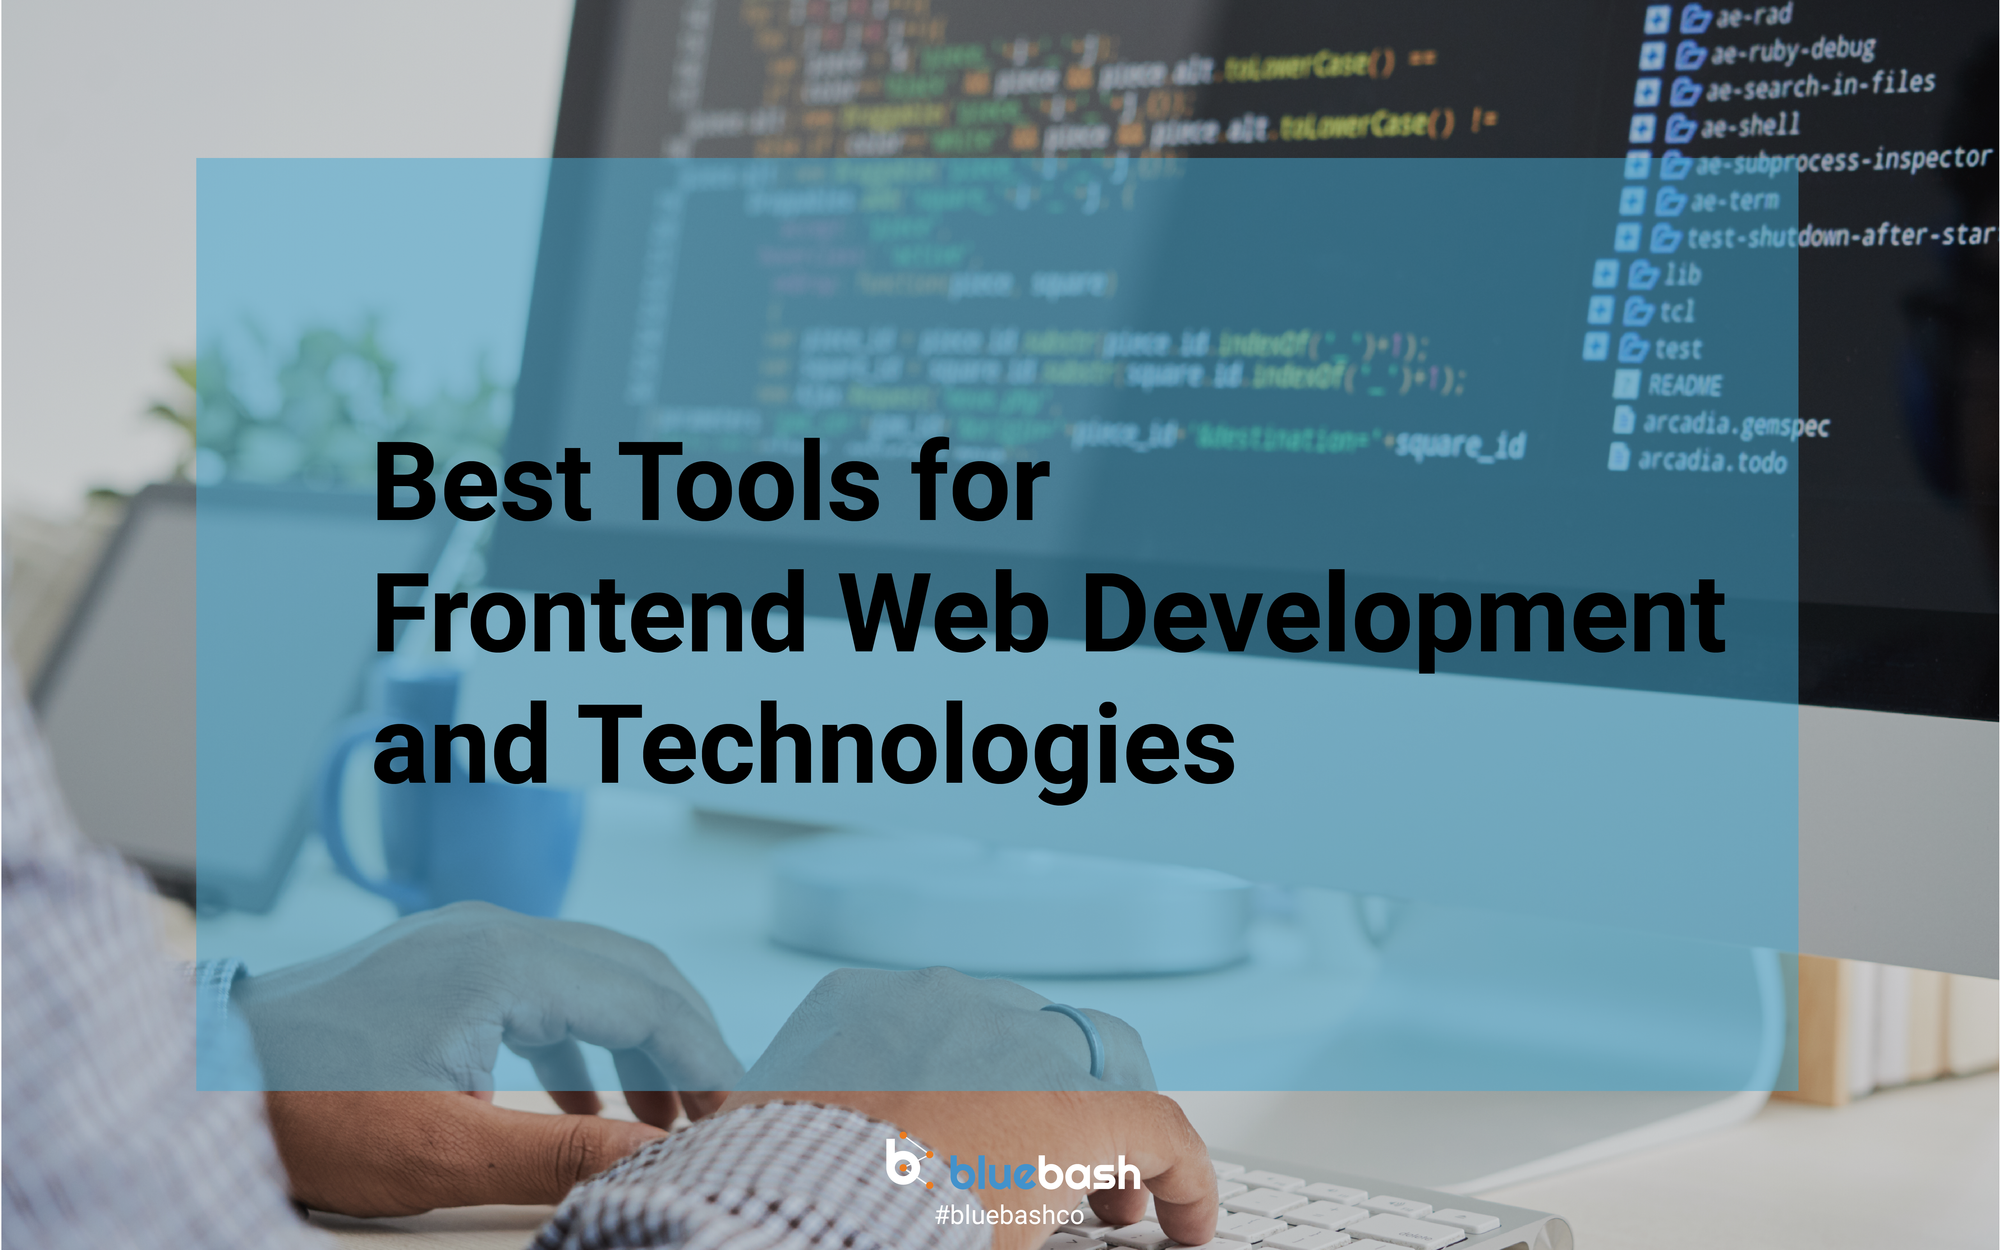 Best Tools for Frontend Web Development and Technologies